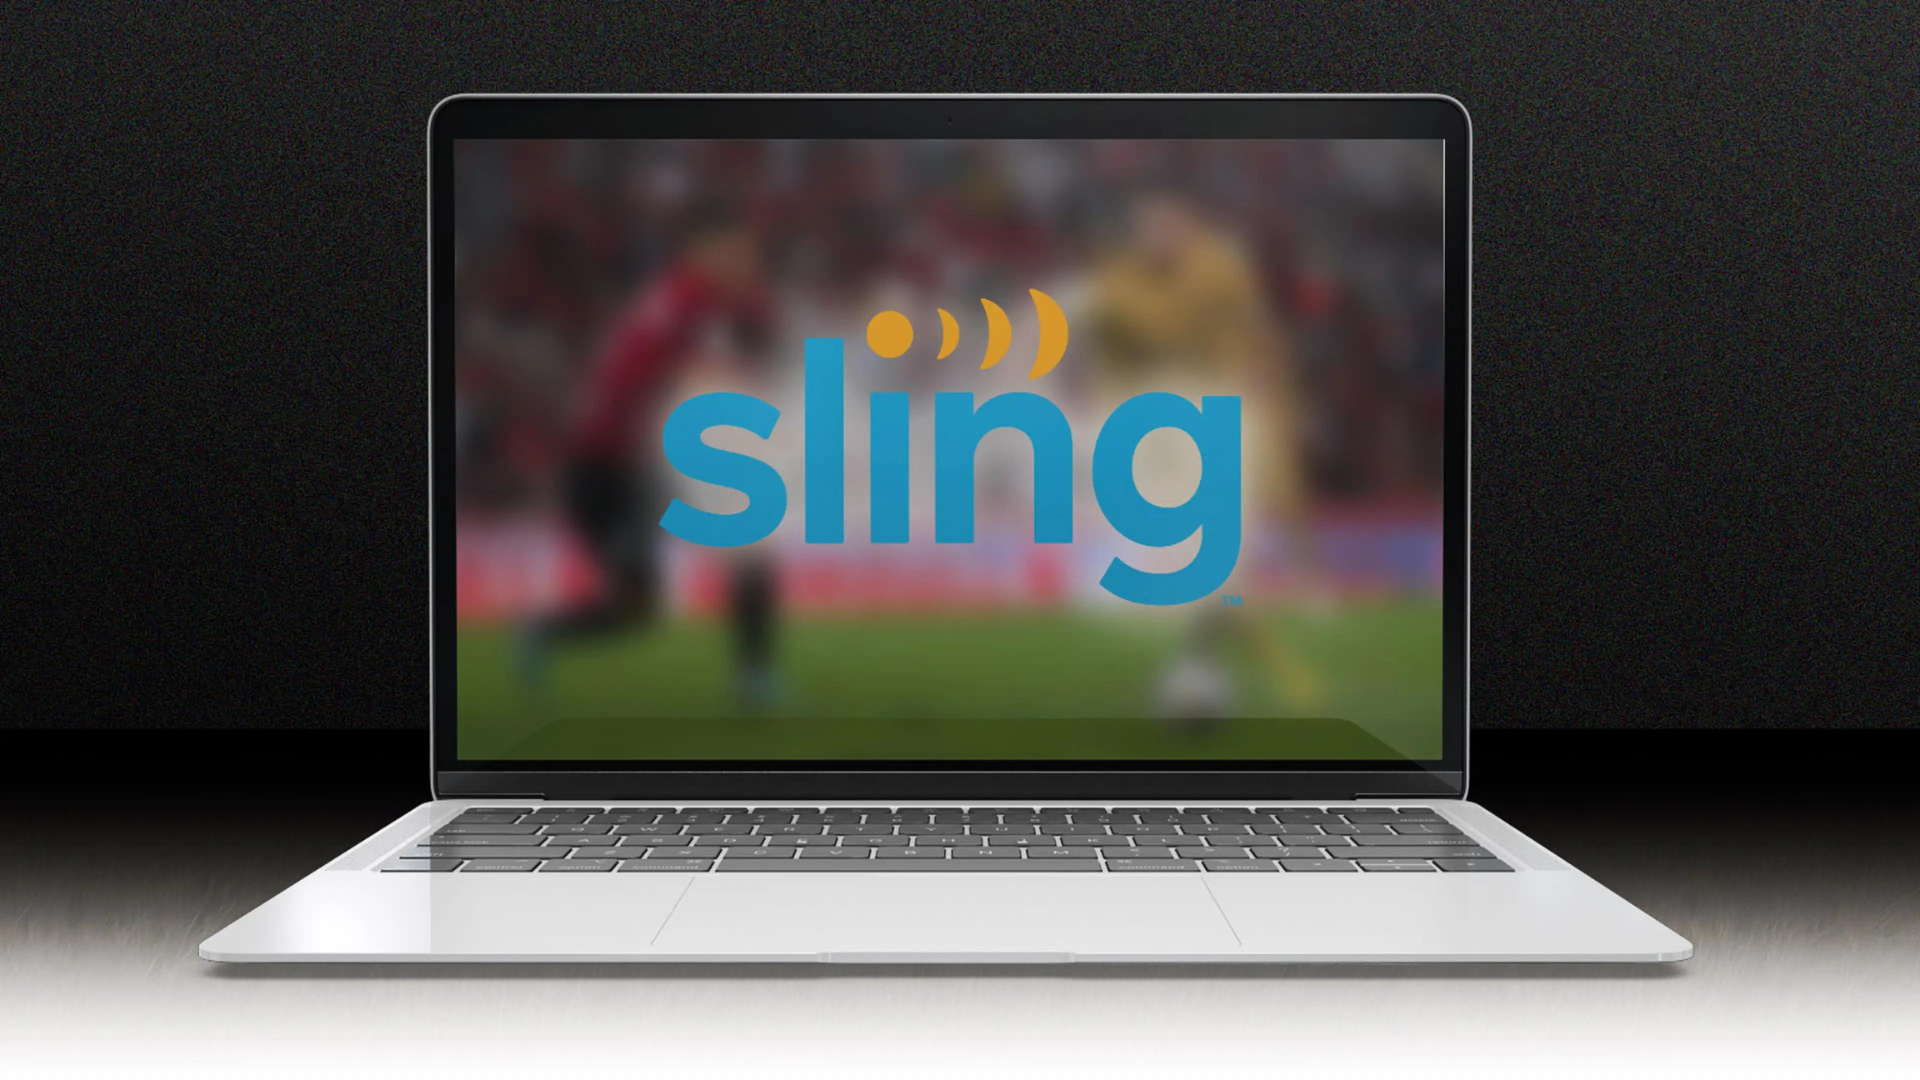 football live streaming service